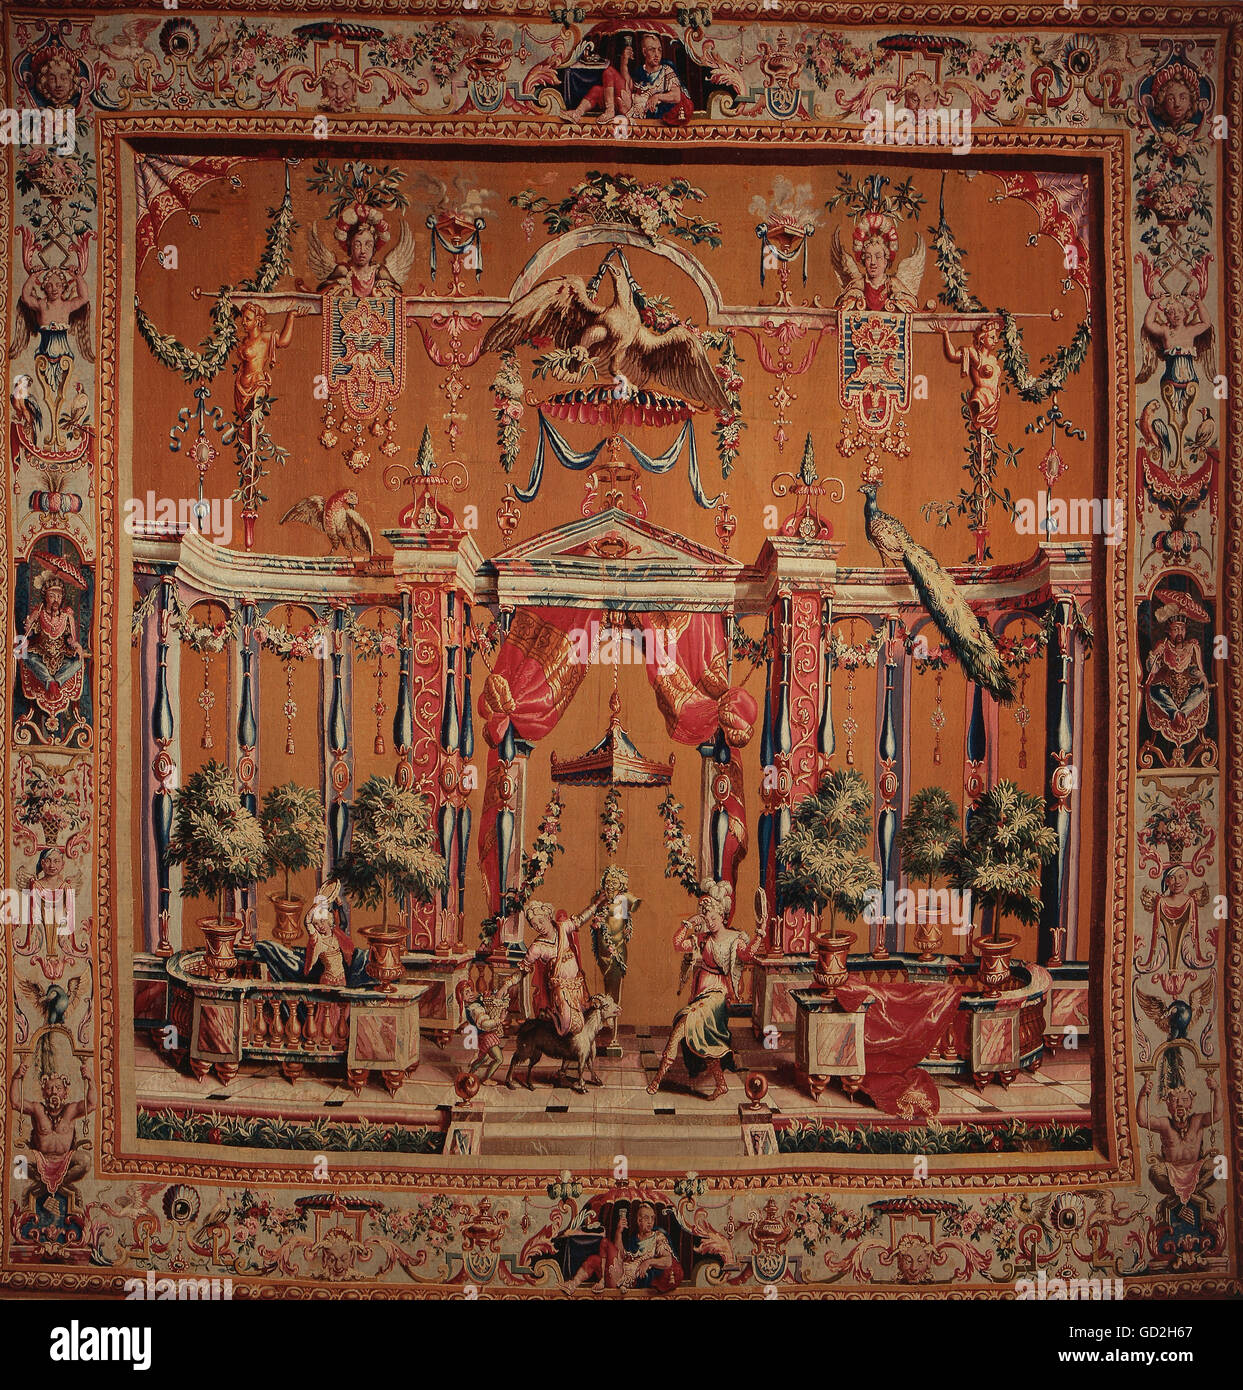 fine arts, tapestry, dancers in phantastic architecture, from the grotesques series, by Philippe Behagle, after design by Jean Berain, Beauvais manufactory, circa 1700, silk, wool, knitted, 326,5 x 317 cm, Baden State Museum, Bruchsal castle, Artist's Copyright has not to be cleared Stock Photo